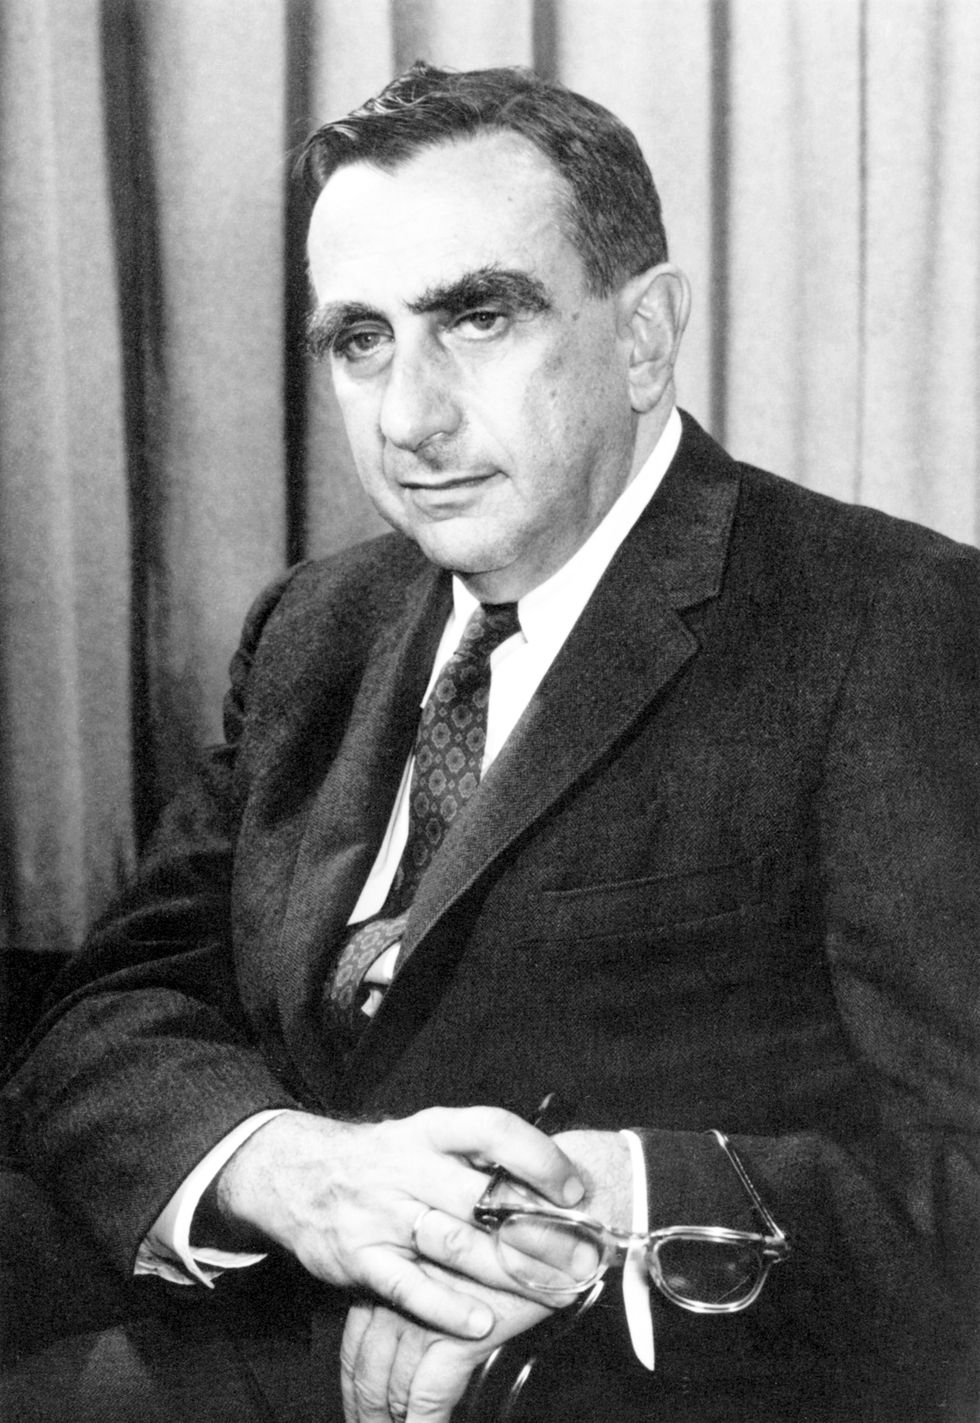 usa hungary edward teller january 15, 1908 Ð september 9, 2003, hungarian born american theoretical physicist known colloquially as 'the father of the hydrogen bomb' lawrence livermore national laboratory, 1958